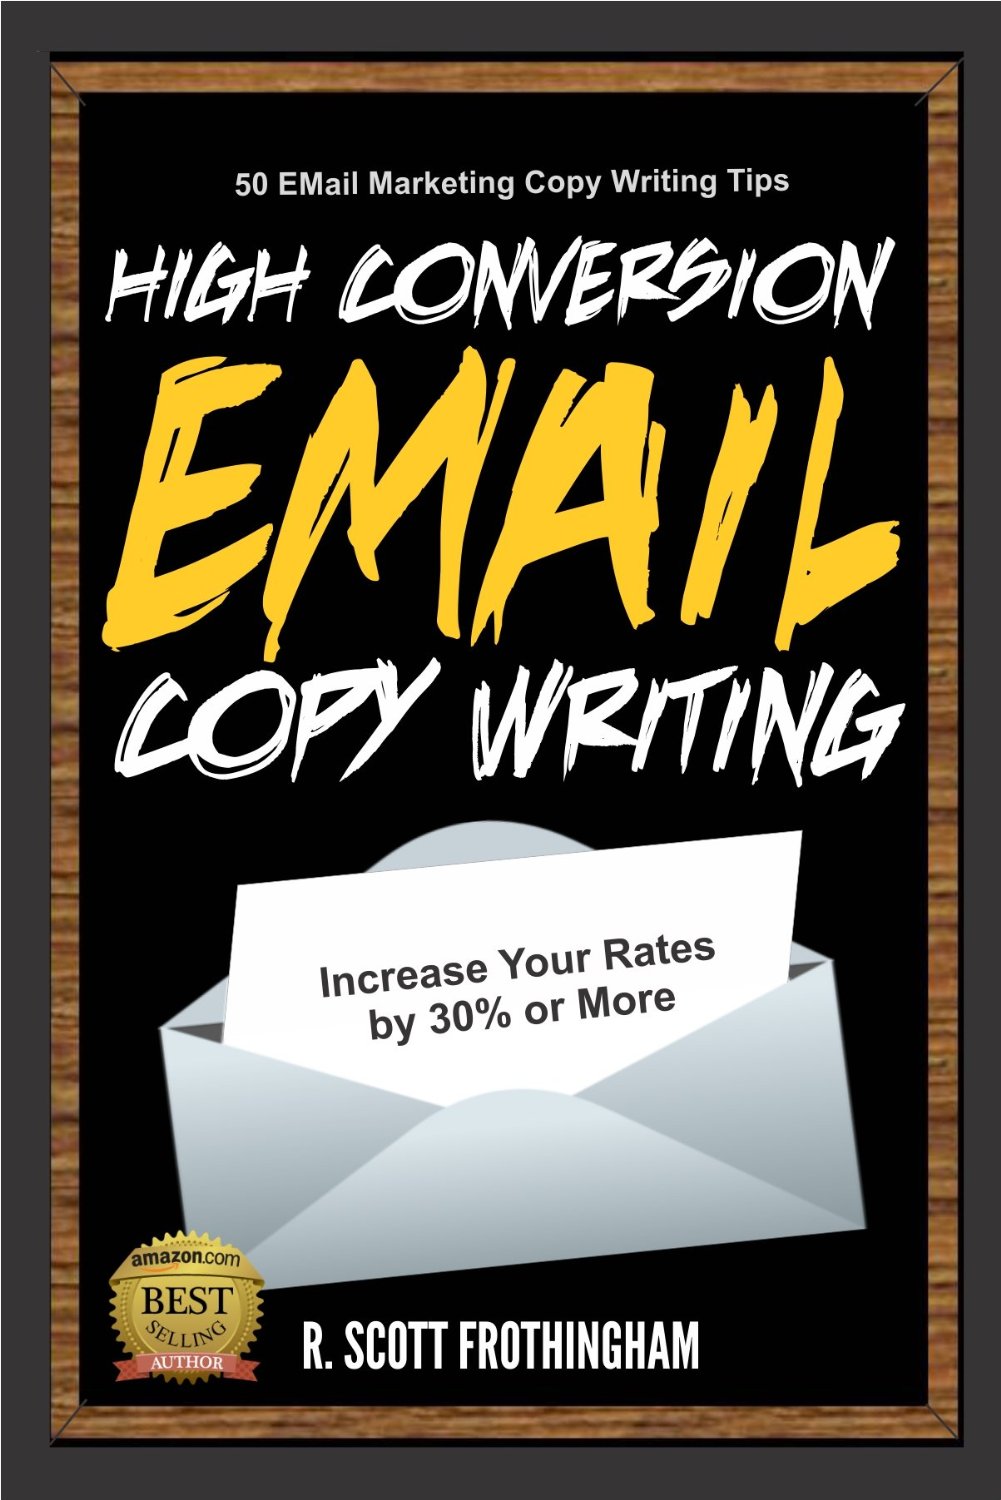 High Conversion E-Mail Copywriting: 50 E-Mail Marketing Copywriting Tips to Increase Your Rates by 30% or More by Scott Frothingham